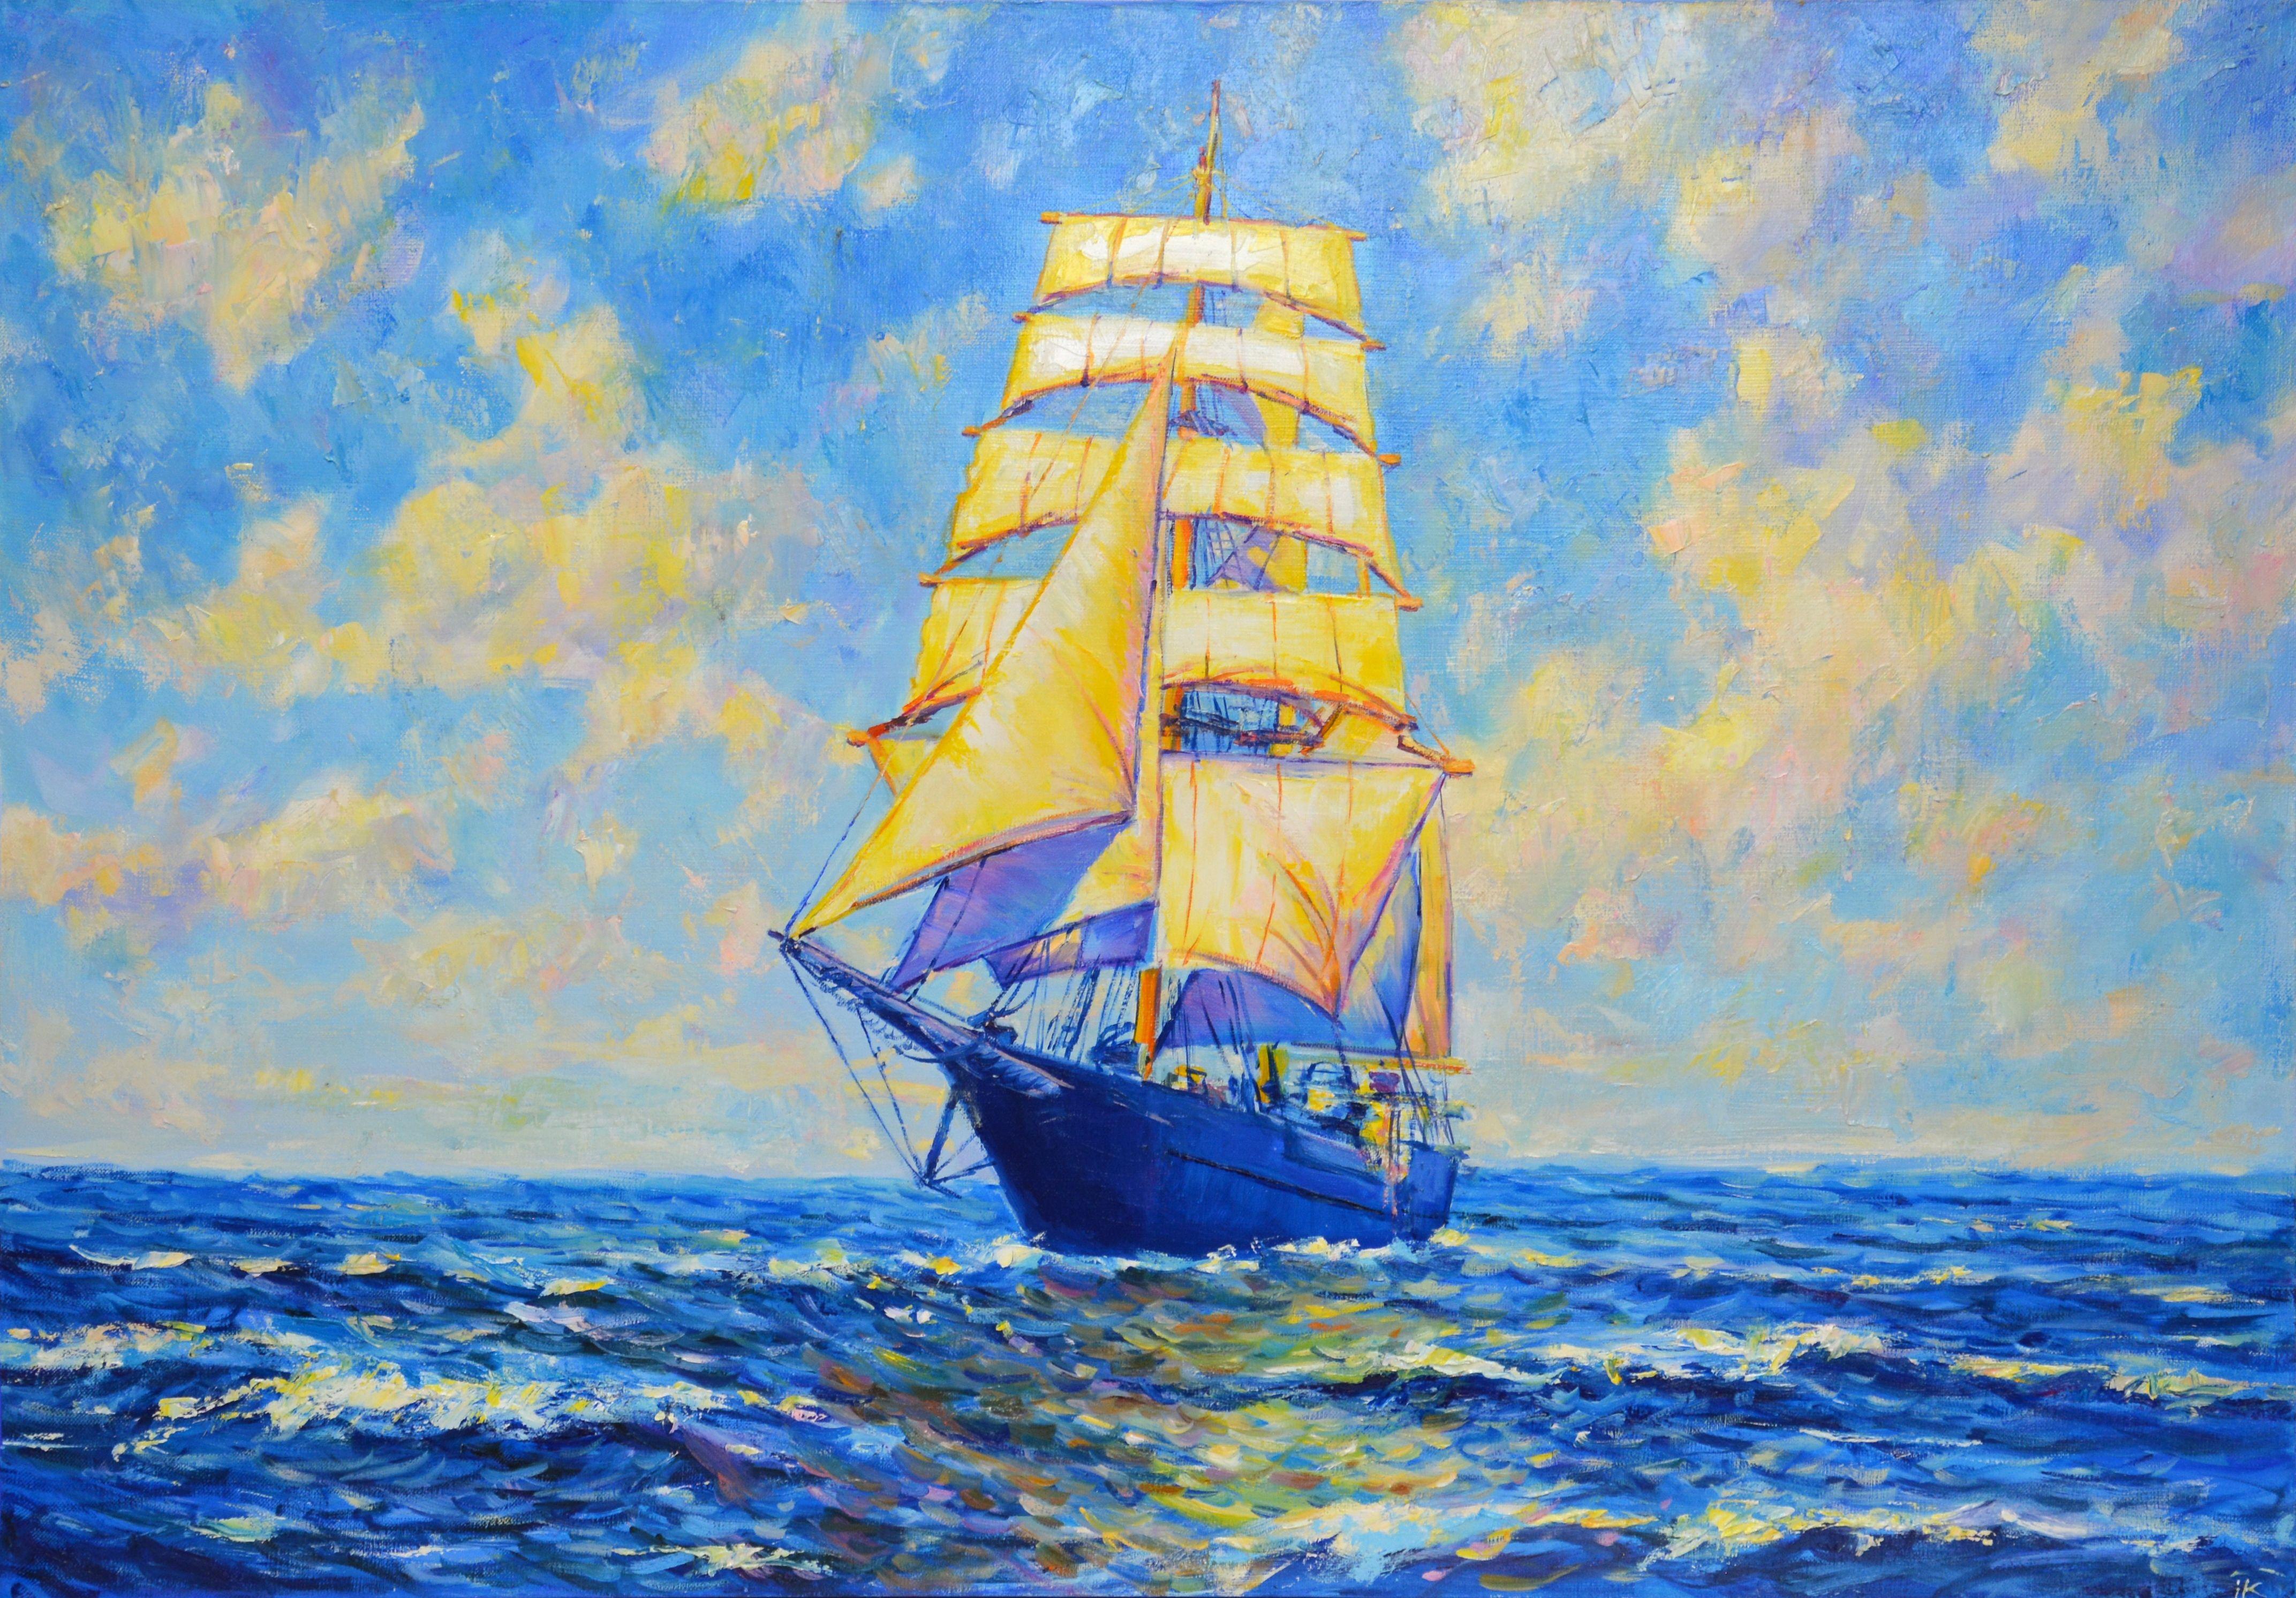 Painting In full sail. Sea, seascape, ocean, waves, blue, turquoise, vacation, romance, impressionism, realism, water, painting, sea foam, sea wave, beach, sun glare, ship, sea voyage, ship, yacht. Oil painting on linen canvas. The sides are painted